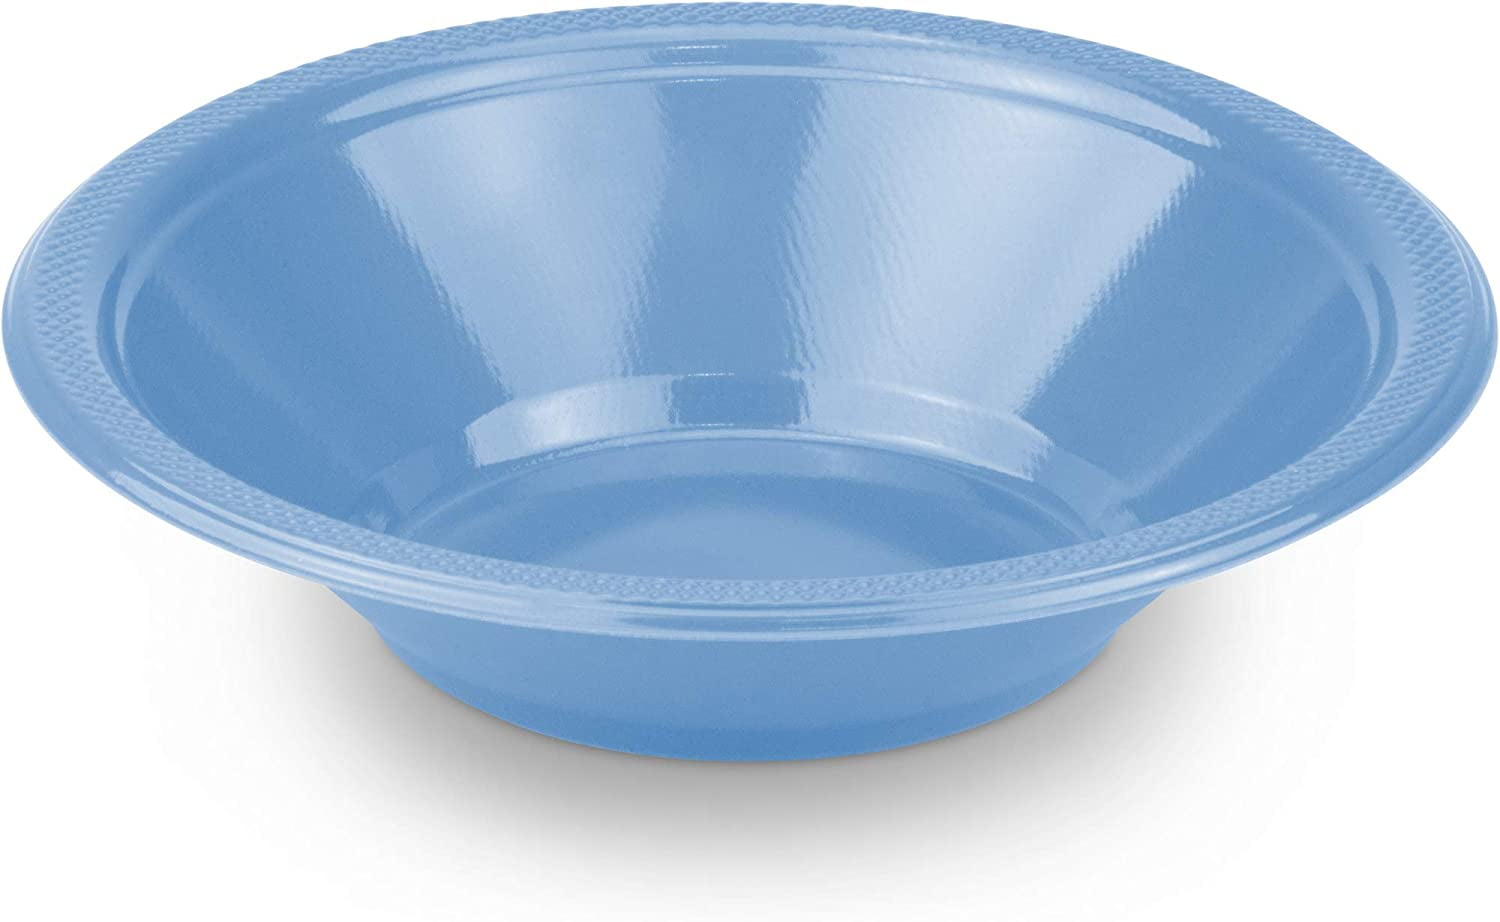 Plastic Bowls With Lids Purple, Blue, Light Blue Collection Of 4